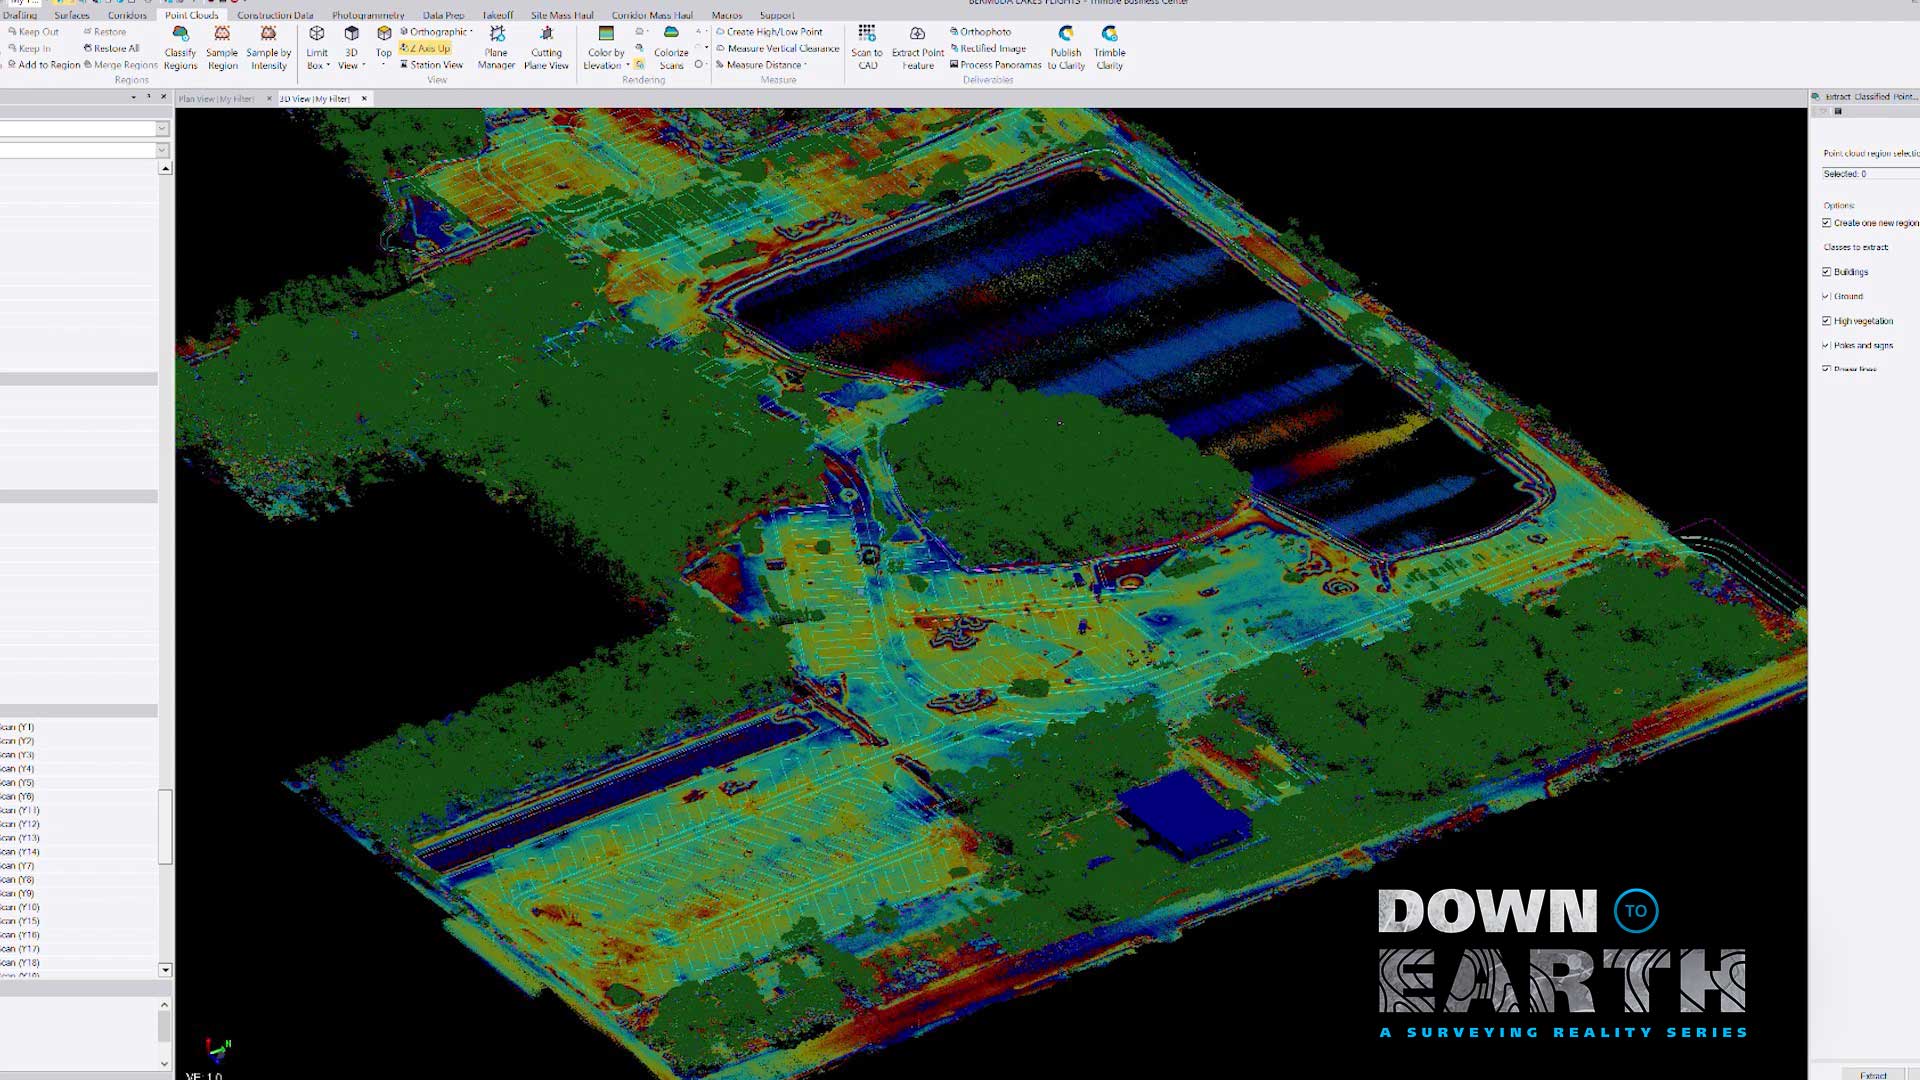 Data collected helps to visualize a LiDAR point cloud of the Construction site to help calculate fill quantities.